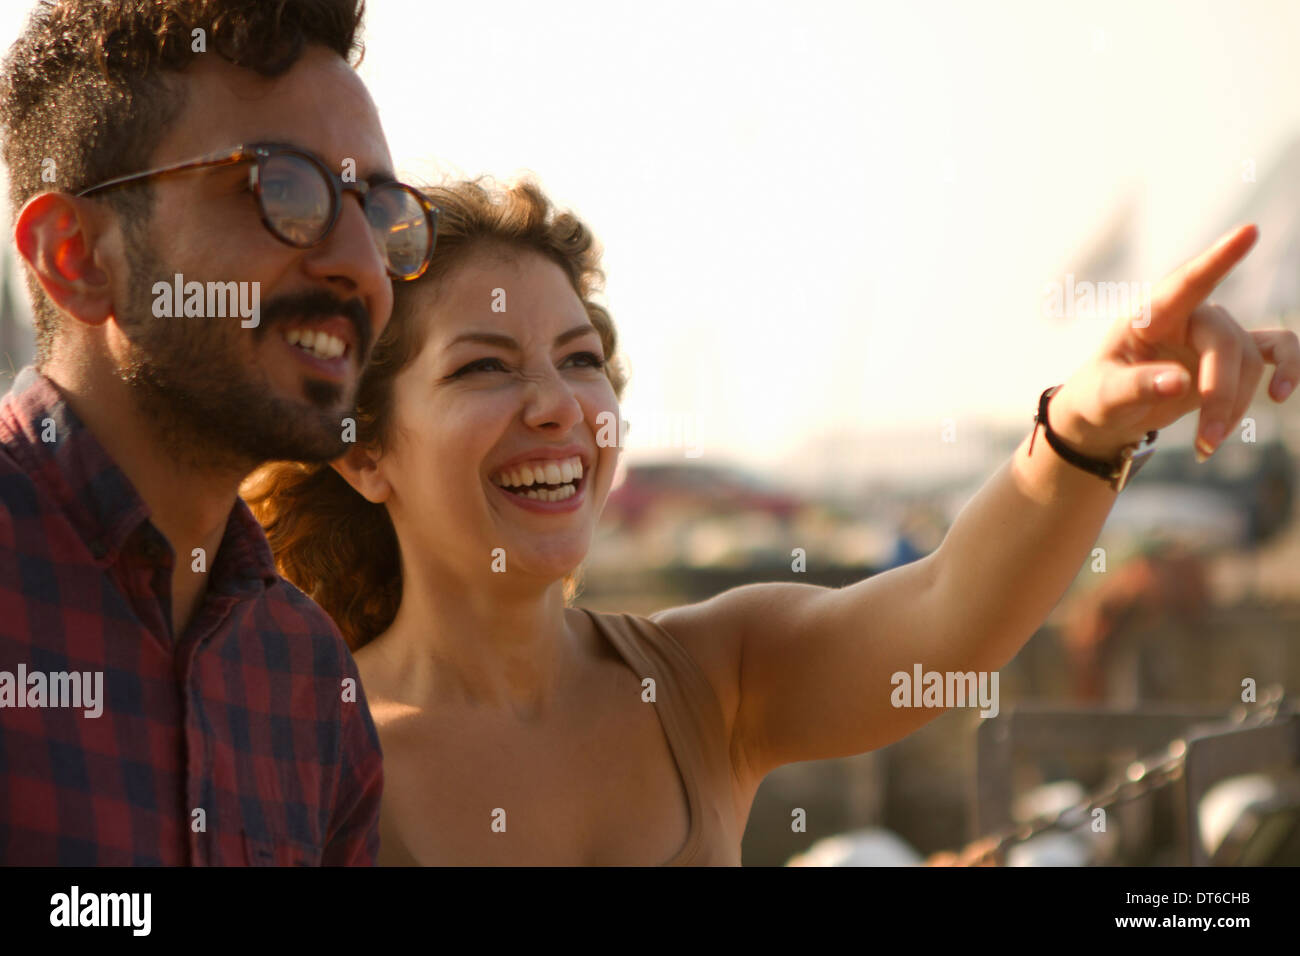 Young couple laughing, woman pointing Stock Photo